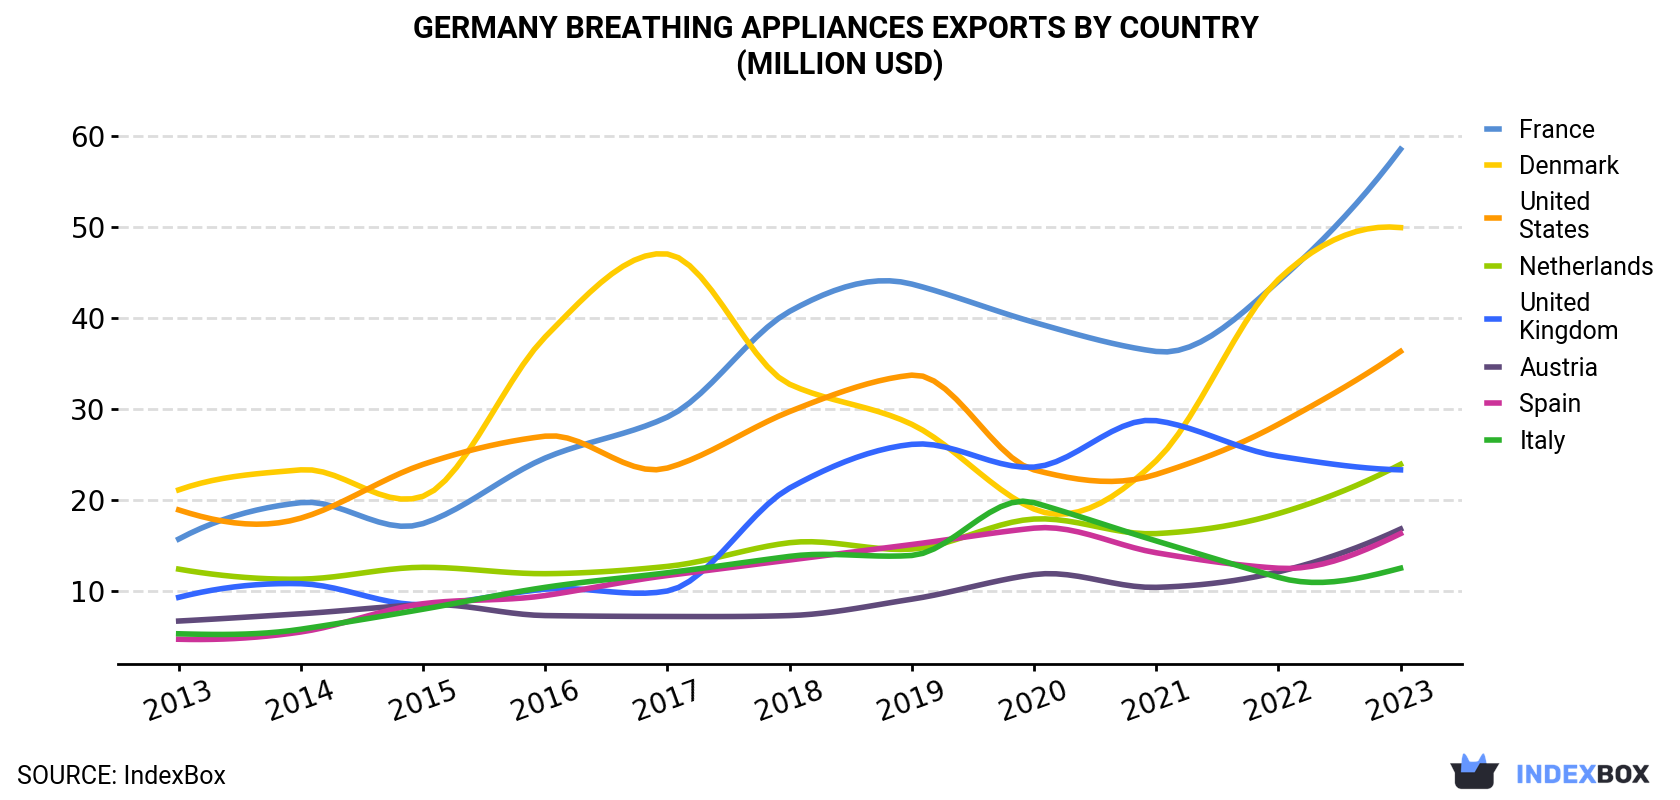 Germany Breathing Appliances Exports By Country (Million USD)